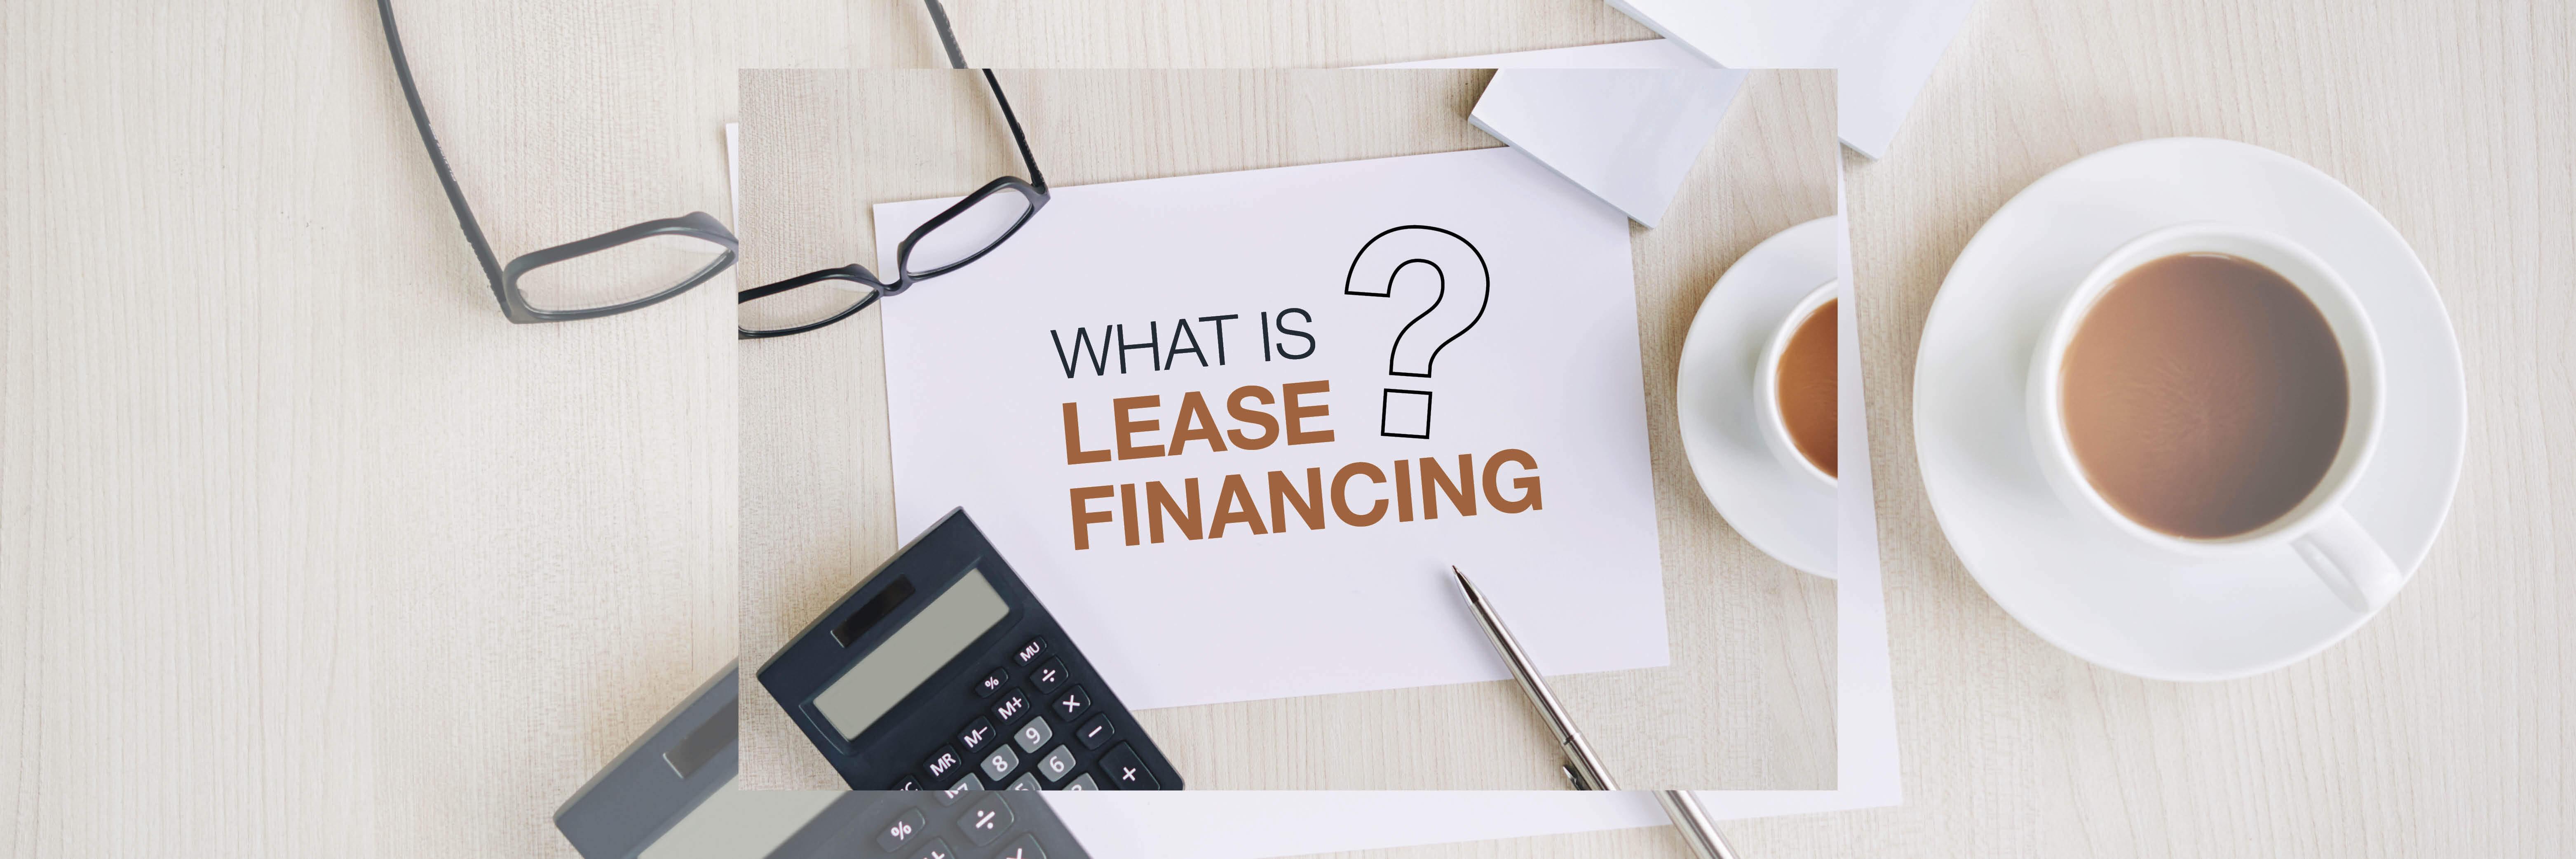 what-is-lease-financing